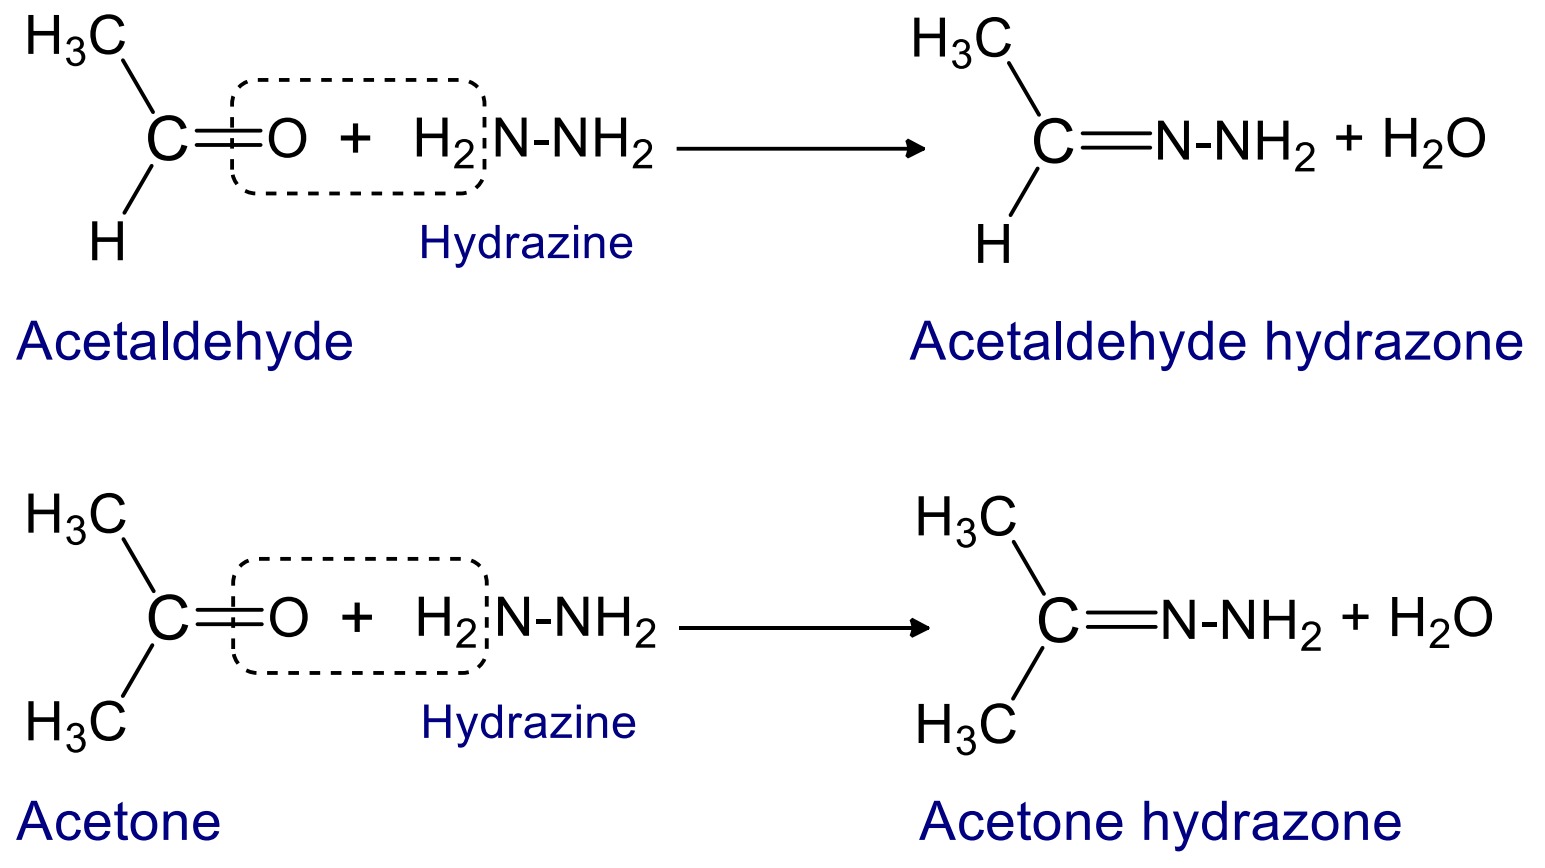 When aldehyde and ketone reacts with hydrazine then hydrazone are formed.